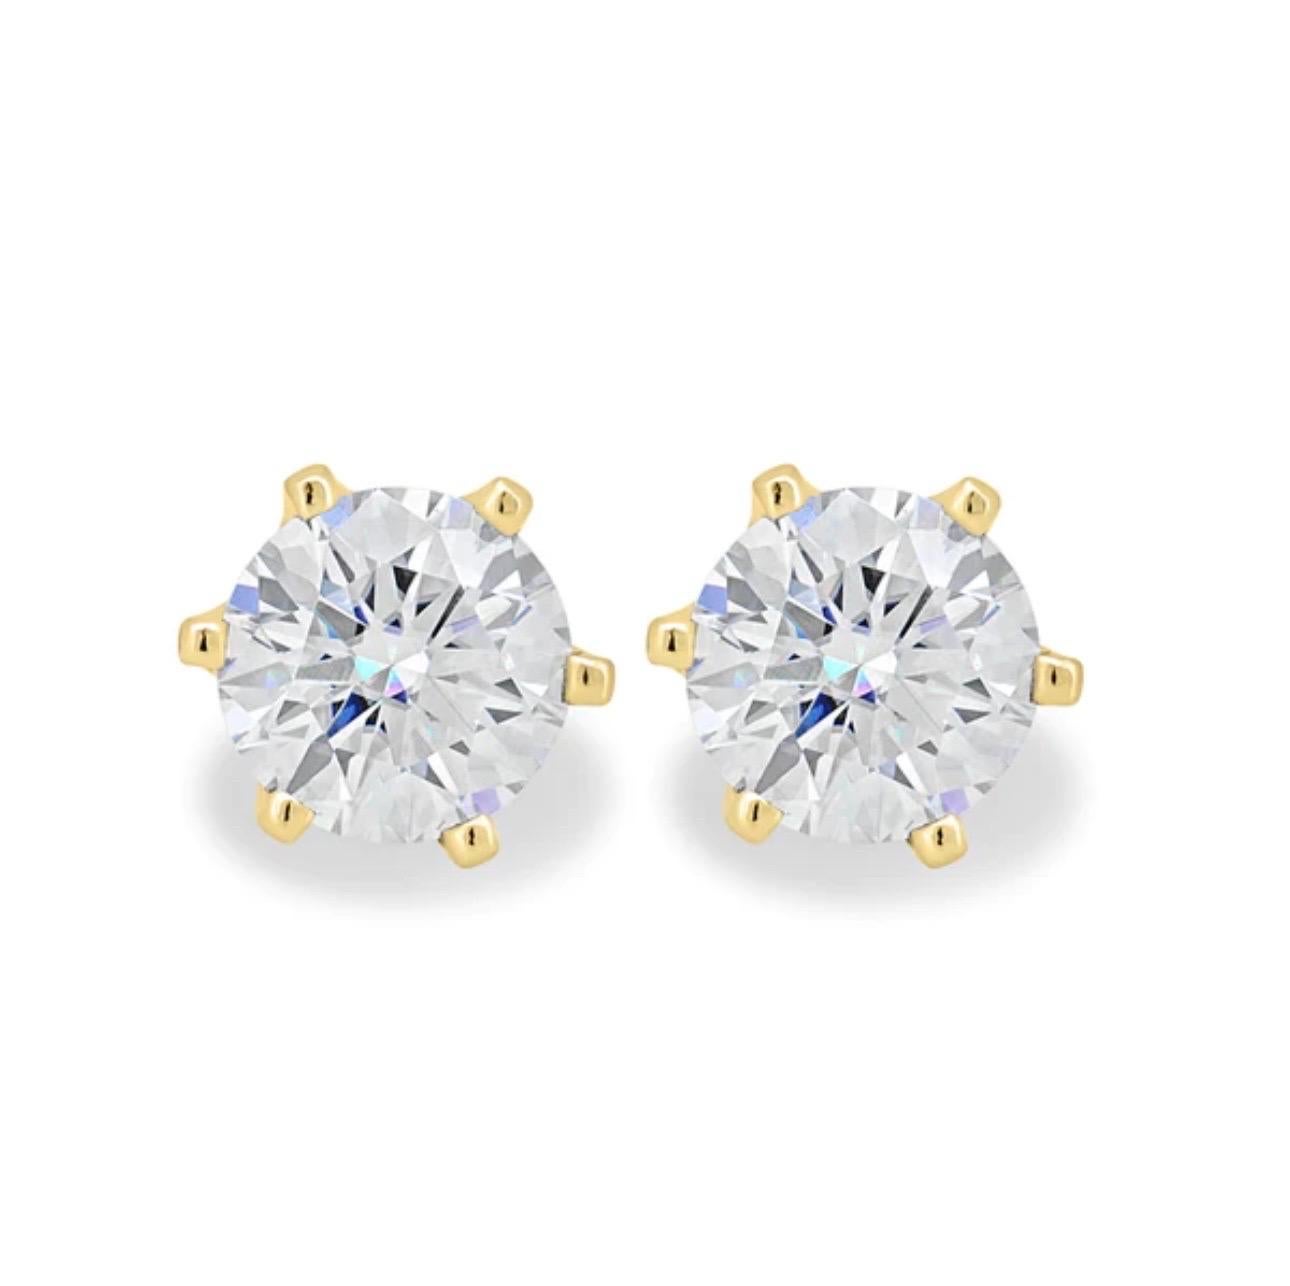 1.0 Carat Diamond Solitaire Stud Earrings 6 Prongs Screw Back 14 Kt Yellow Gold For Sale 2